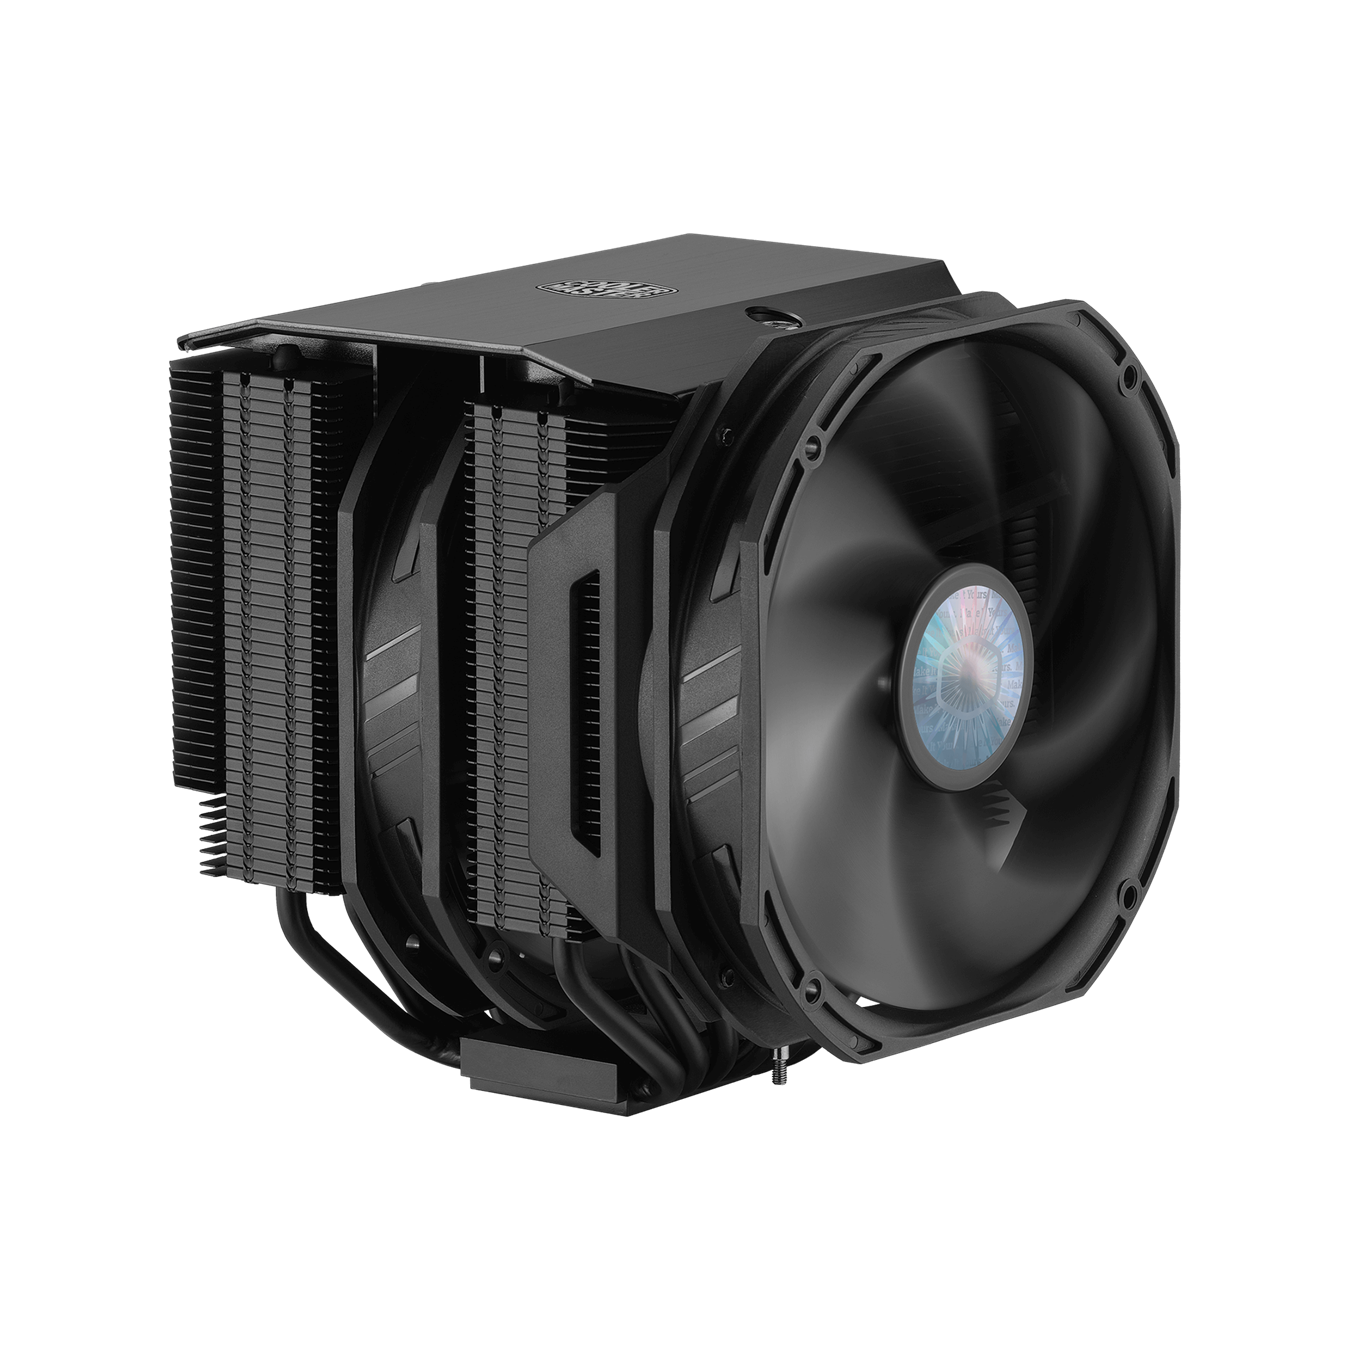 MasterAir MA624 Stealth - Twin fans utilize Push-Pull setup for optimal airflow and pressure